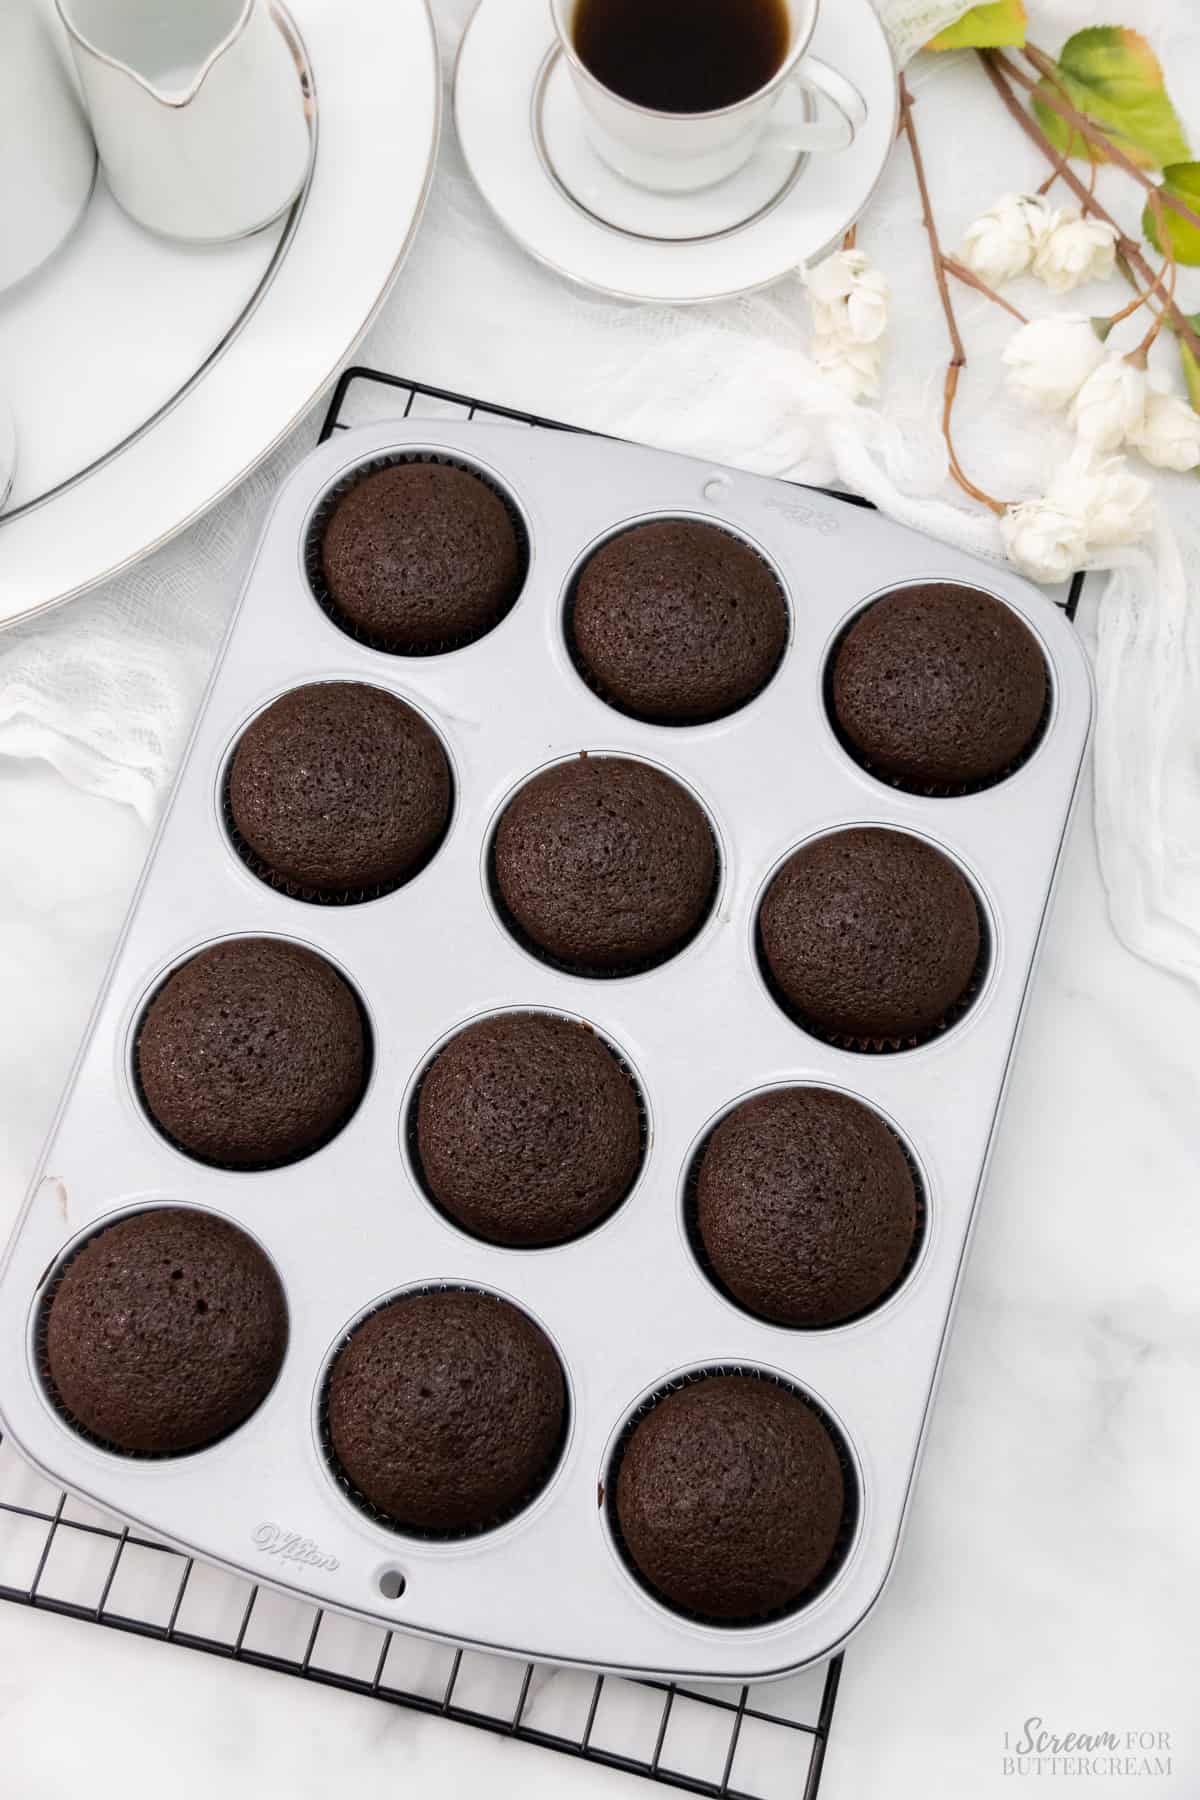 Baked chocolate cupcakes in a cupcake pan on a cooling rack.